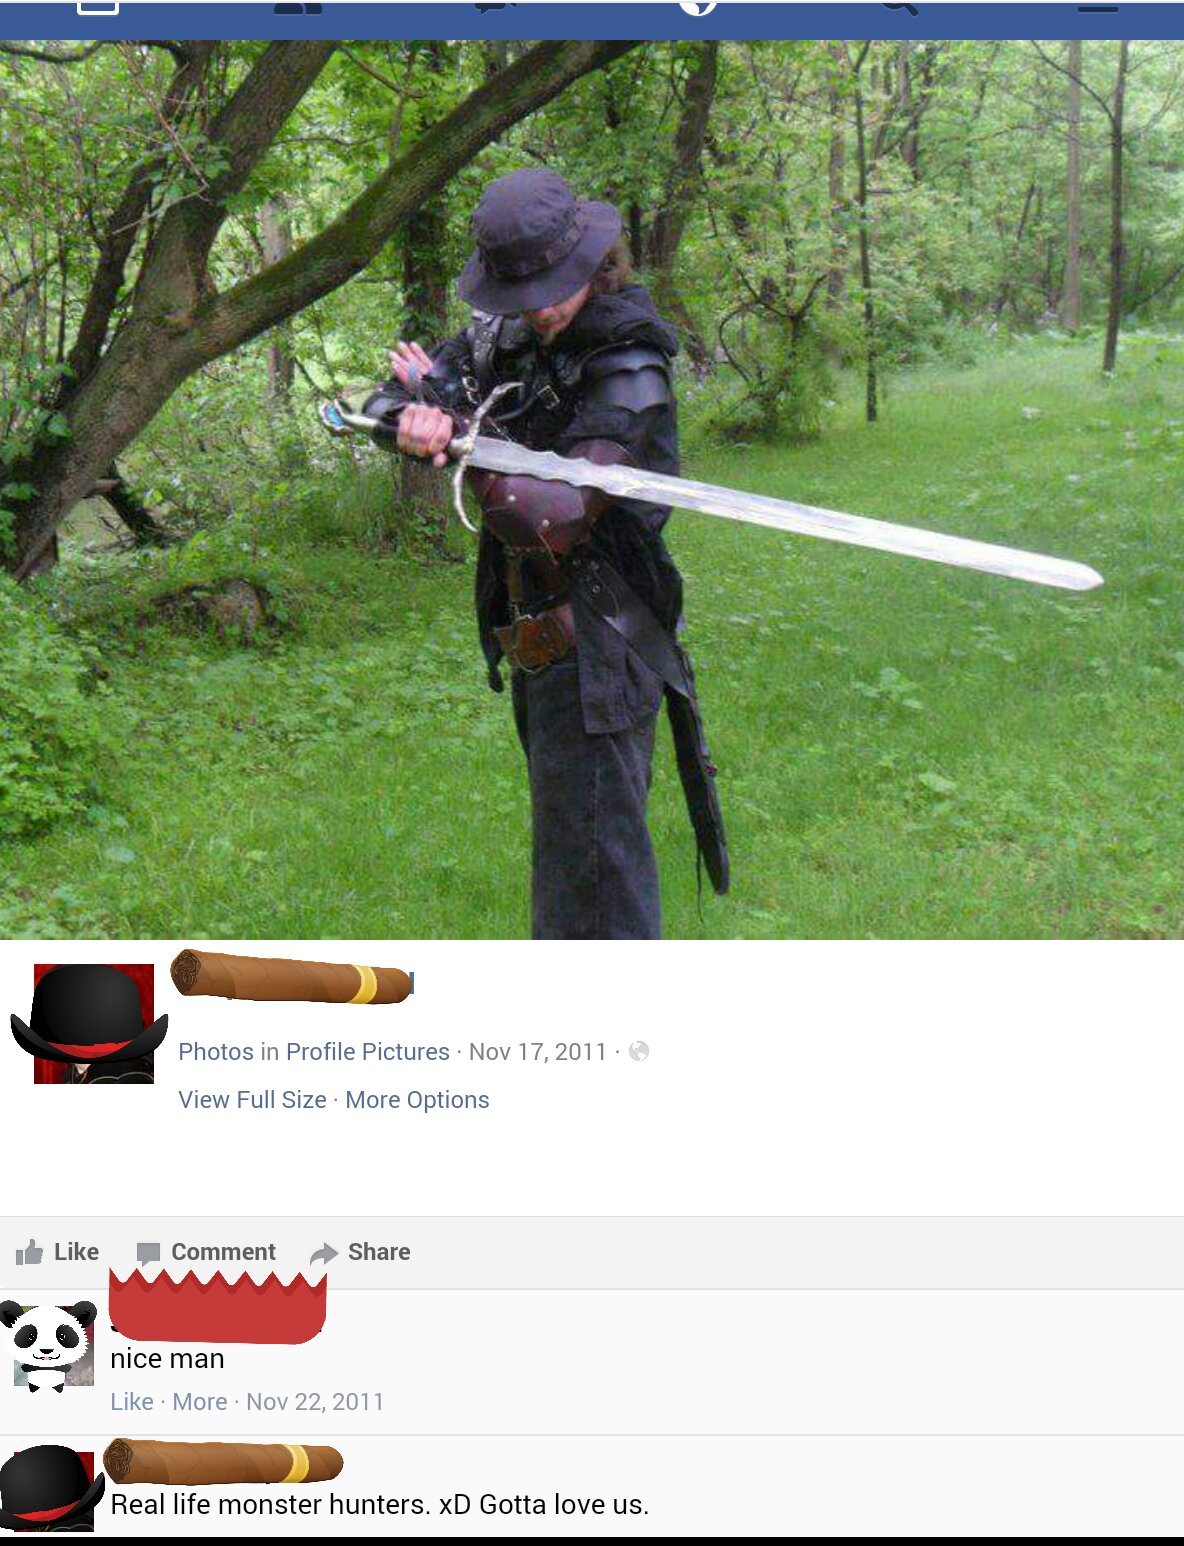 cringe gun profile - Photos in Profile Pictures View Full Size . More Options Comment nice man More Real life monster hunters. xD Gotta love us.